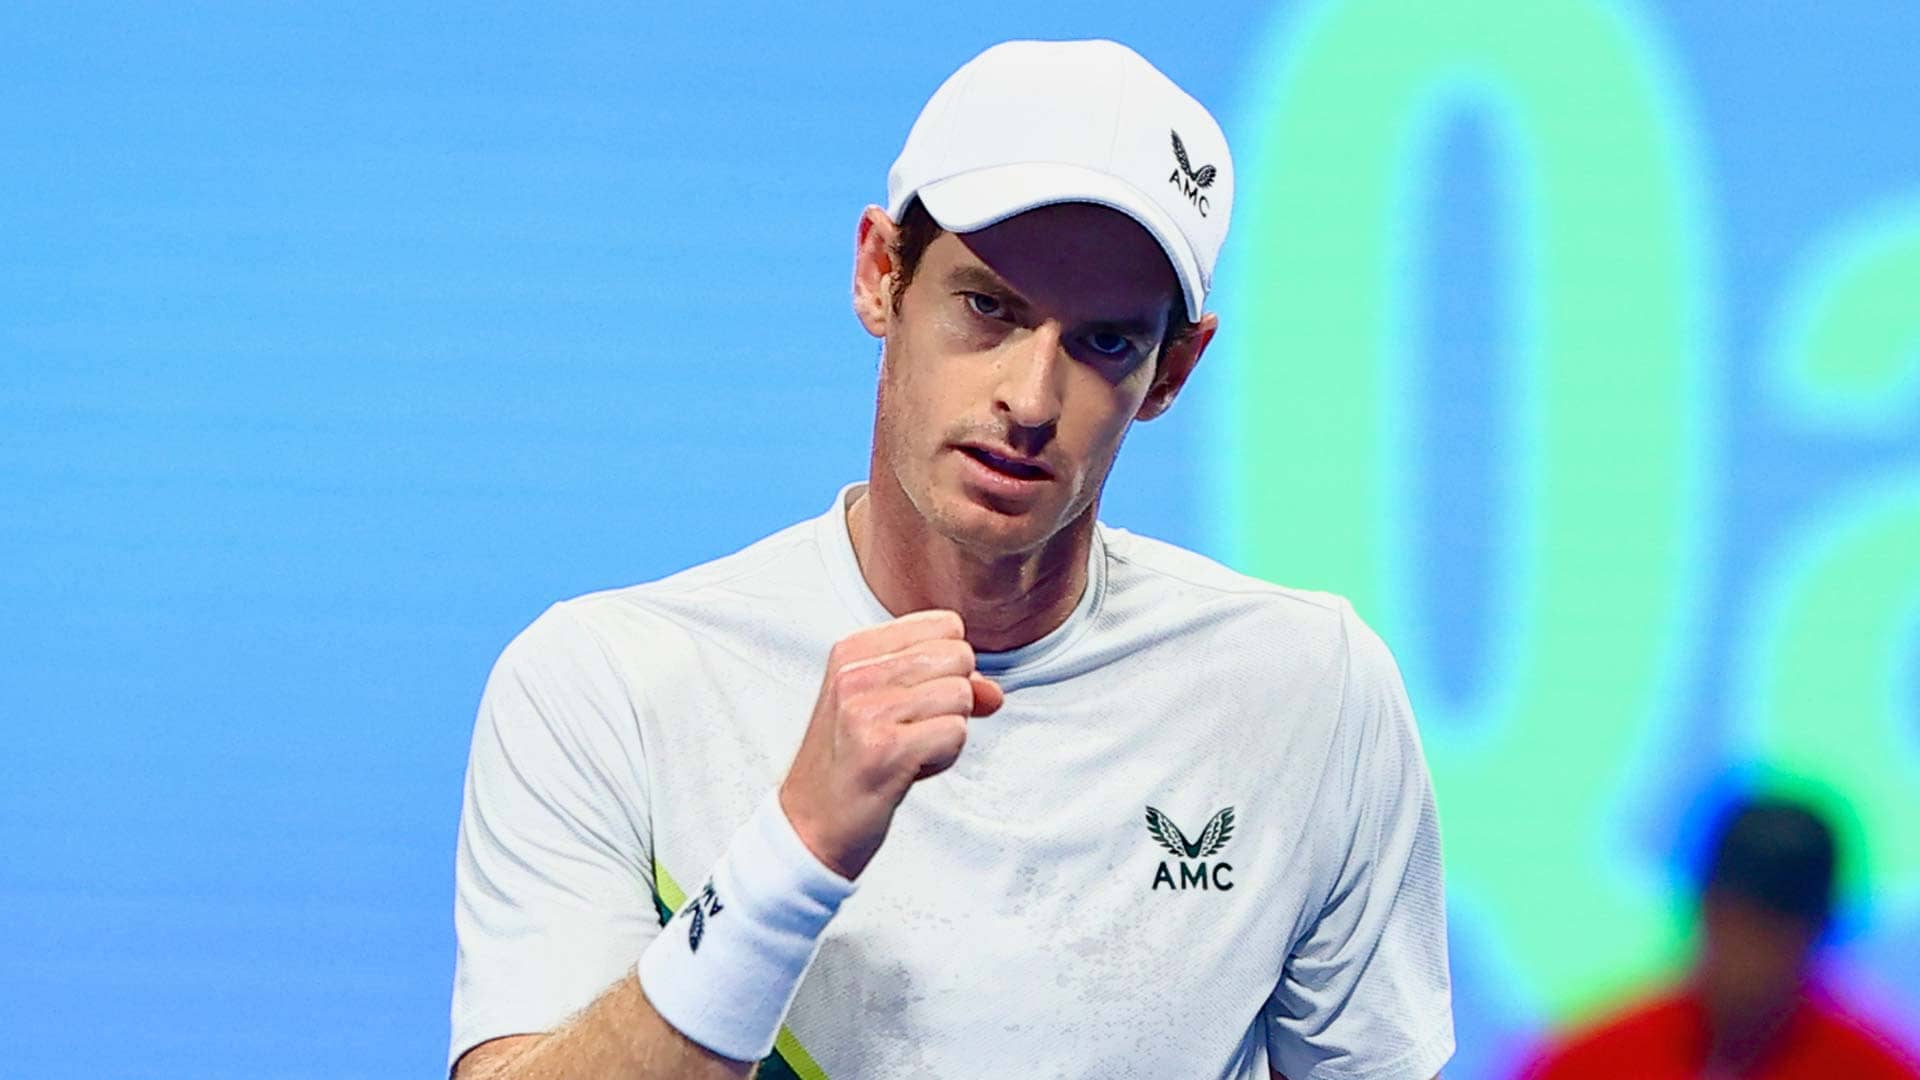 Andy Murray has spent more than 20 hours on court in his past six matches.